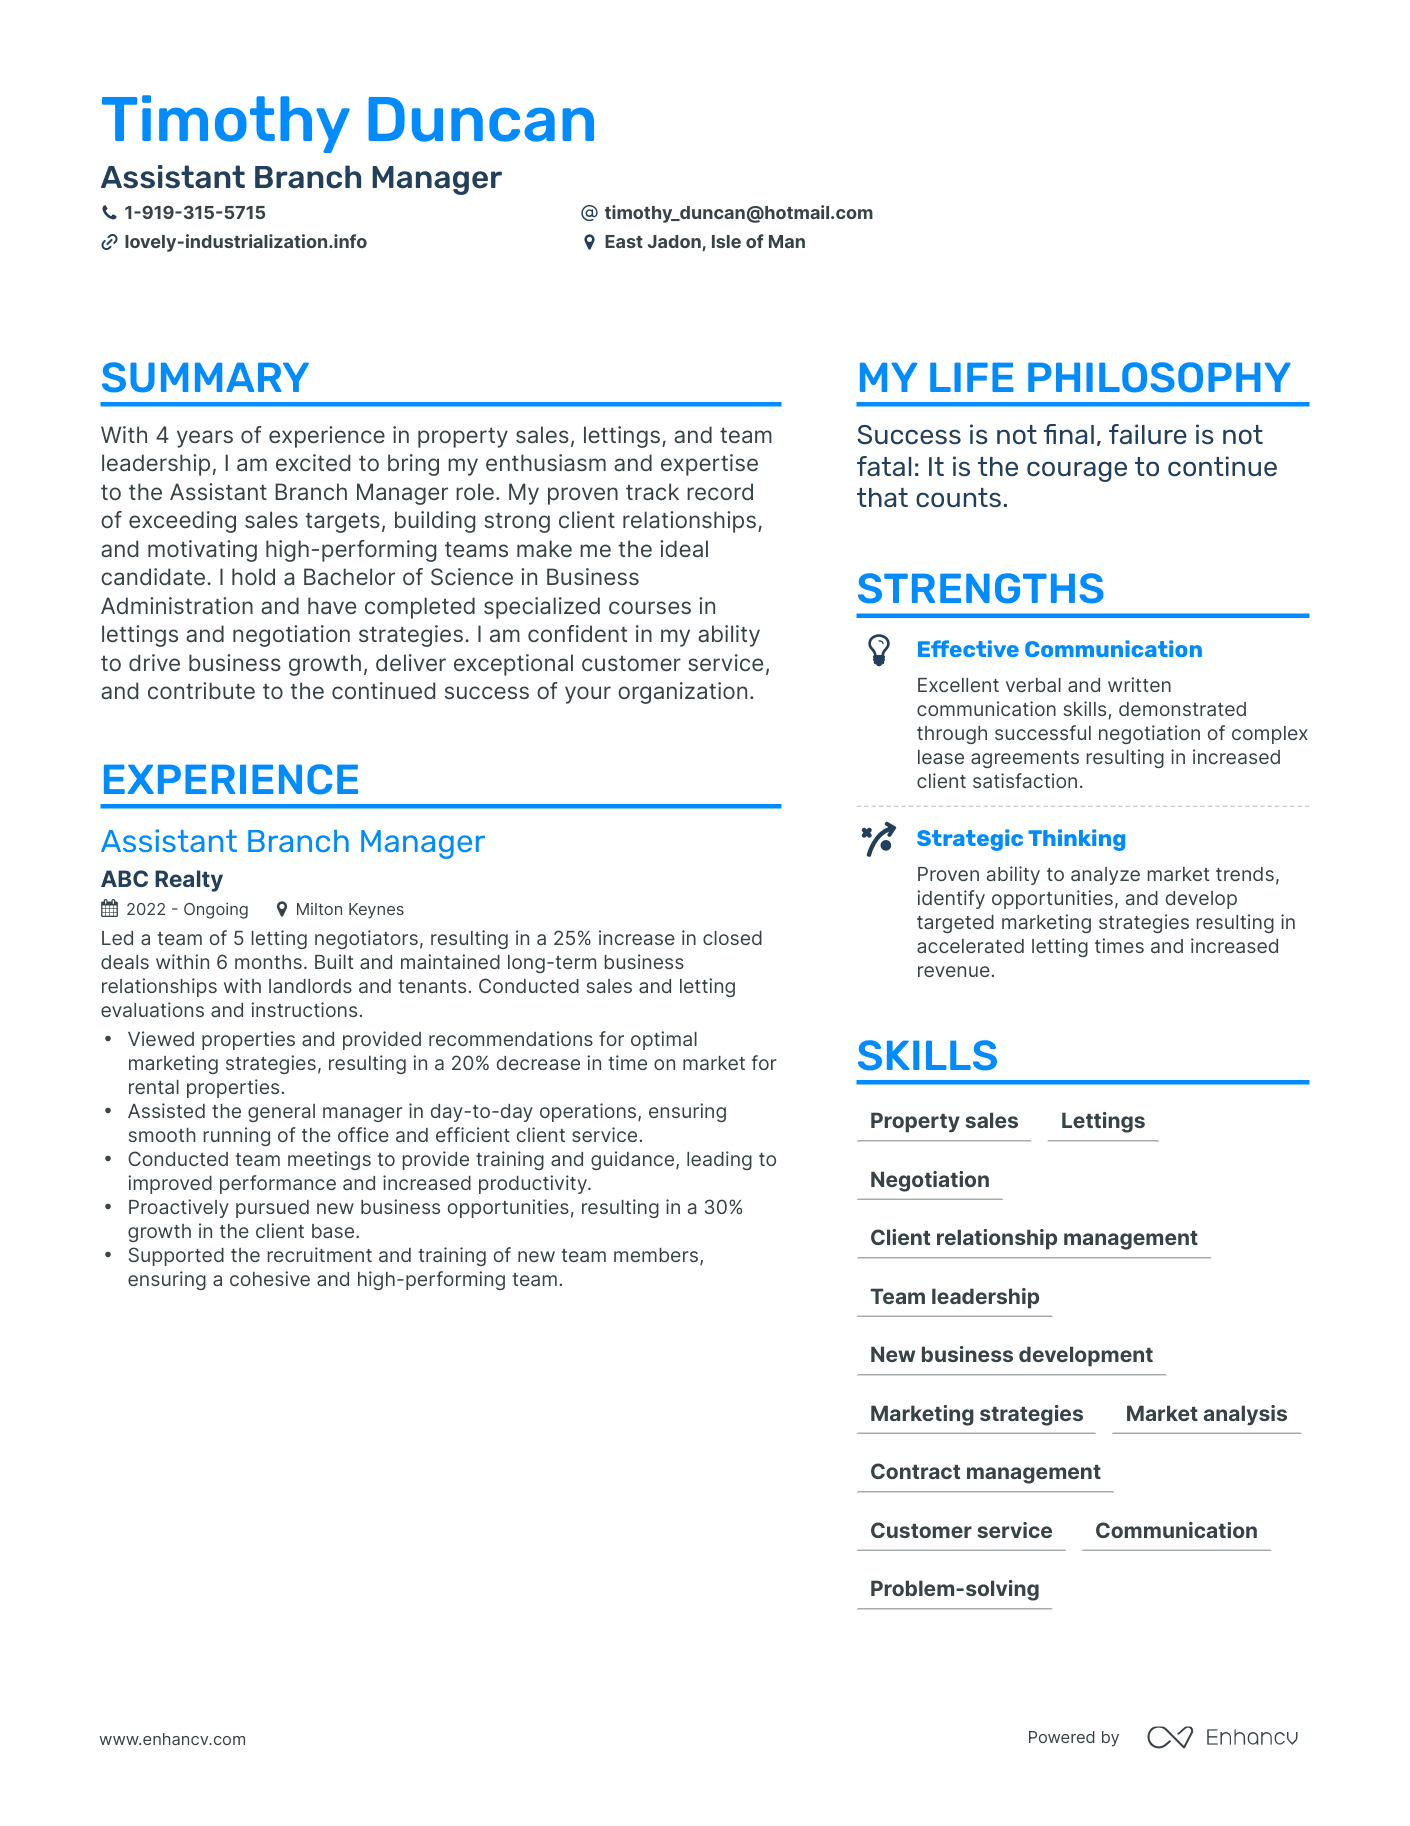 Assistant Branch Manager resume example